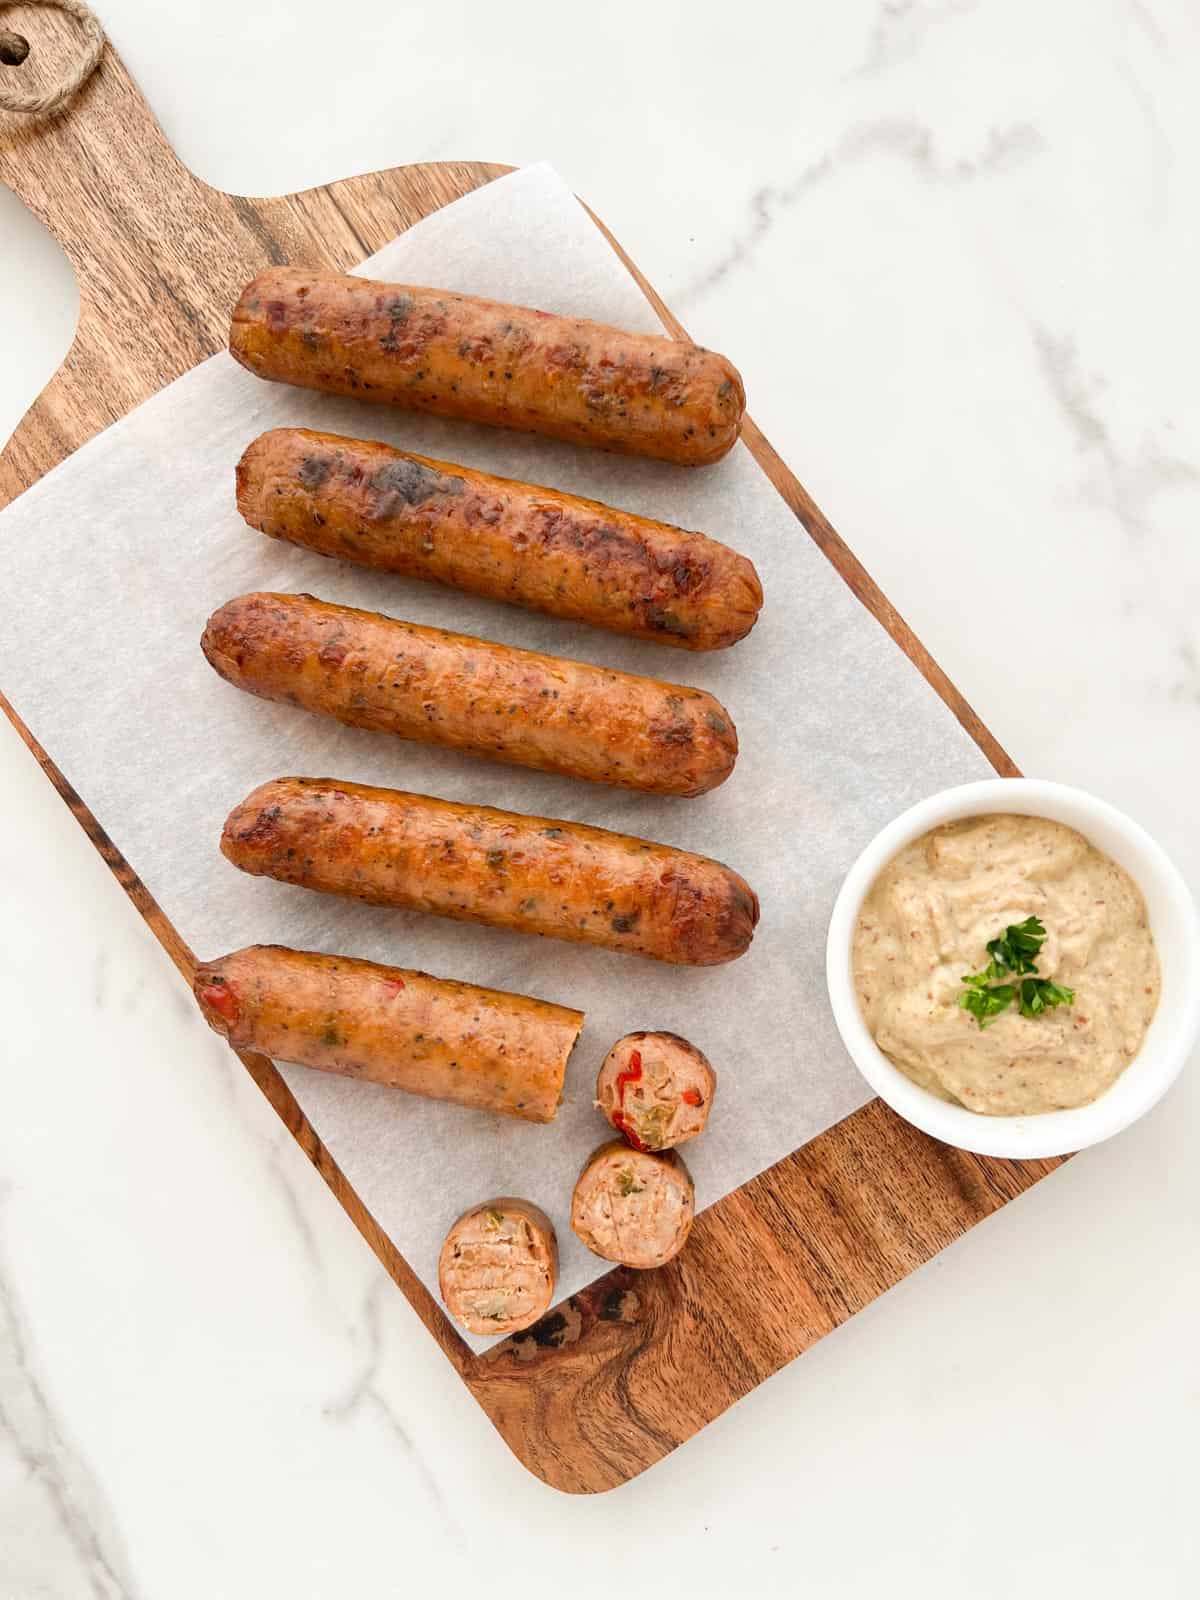 Chicken sausages served on a wood tray with mustard dip.